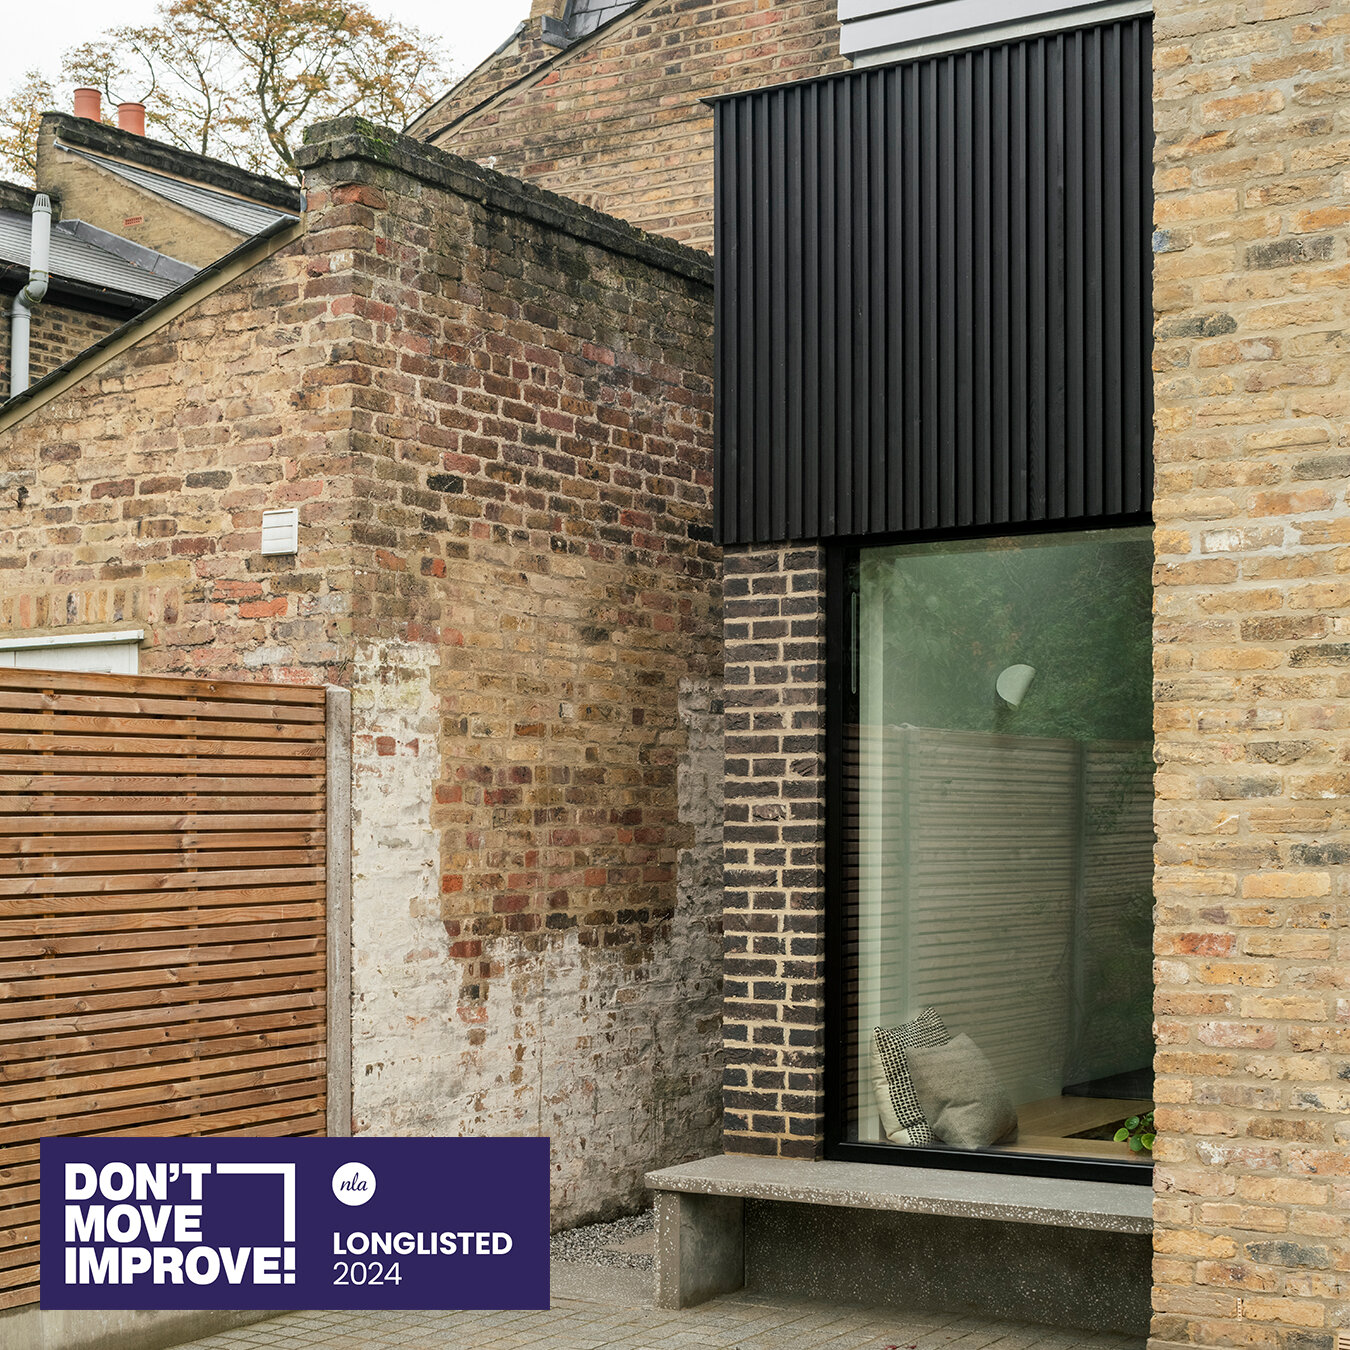 We're proud to announce A Mended House in Stoke Newington has been longlisted by Don't Move, Improve! 2024, @nlalondon's annual competition and programme celebrating the best homes being redesigned in London.

It has been selected alongside Hillside 